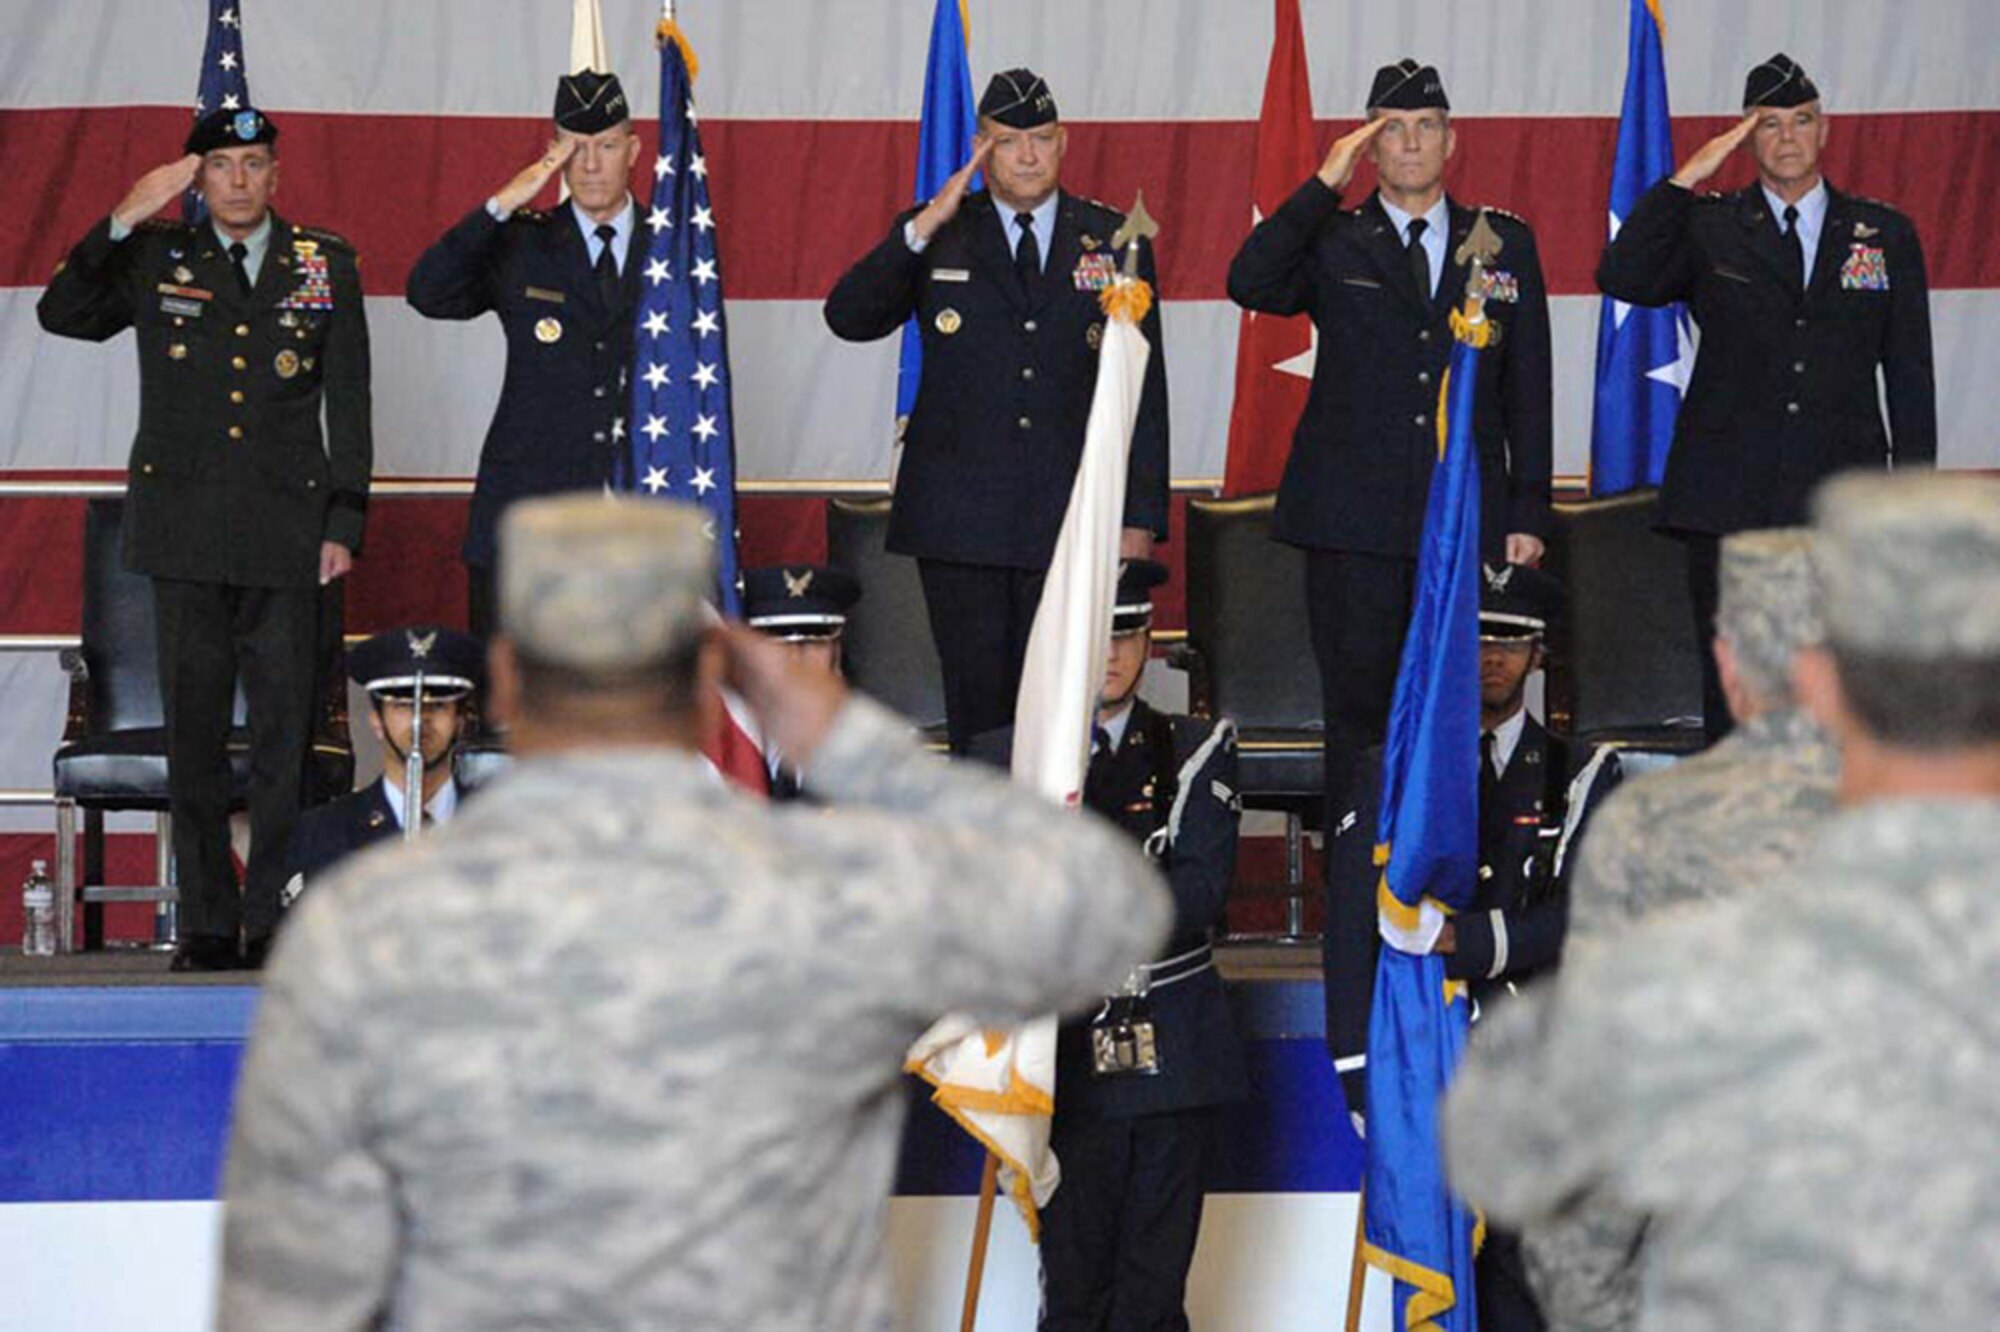 Army Gen. David Petraeus (left to right), Gen. John D.W. Corley, Lt. Gen. Gary North, Lt. Gen. Gilmary Michael Hostage III and Maj. Gen. William L. Holland salute the colors during the 9th Air Force/U.S. Air Force Central change-of-command ceremony Aug 5 at Shaw Air Force Base, S.C. General North relinquished command of 9th AF/USAFCENT, which was re-designated as AFCENT Command and a new headquarters 9th Air Force was activated. General Petraeus is the U.S. Central Command commander, General Corley is the Air Combat Command commander, General North is the outgoing 9th Air Force and U.S. Air Forces Central commander, General Hostage is the receiving USAFCENT Command commander, and General Holland is the receiving 9th Air Force commander. (U.S. Air Force photo/Senior Airman Matt Davis)